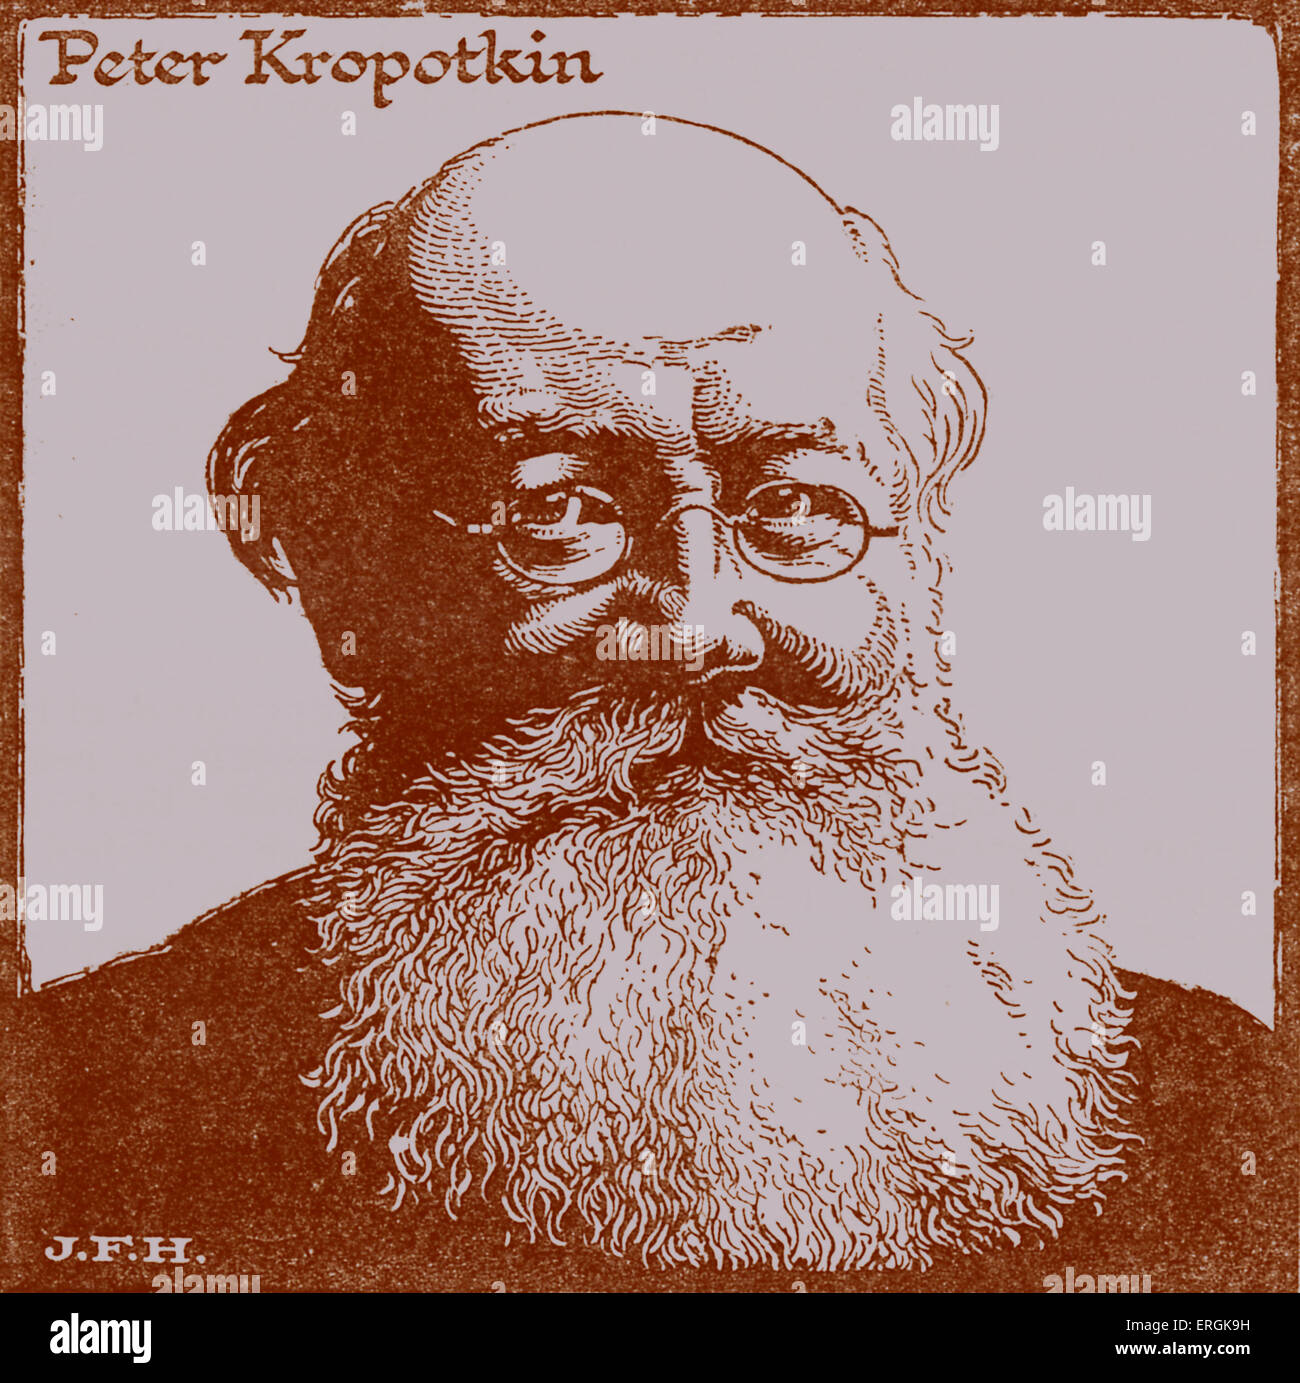 Peter Kropotkin (1842 - 1921), Russian anarcho-communist and revolutionary, 1917. Stock Photo